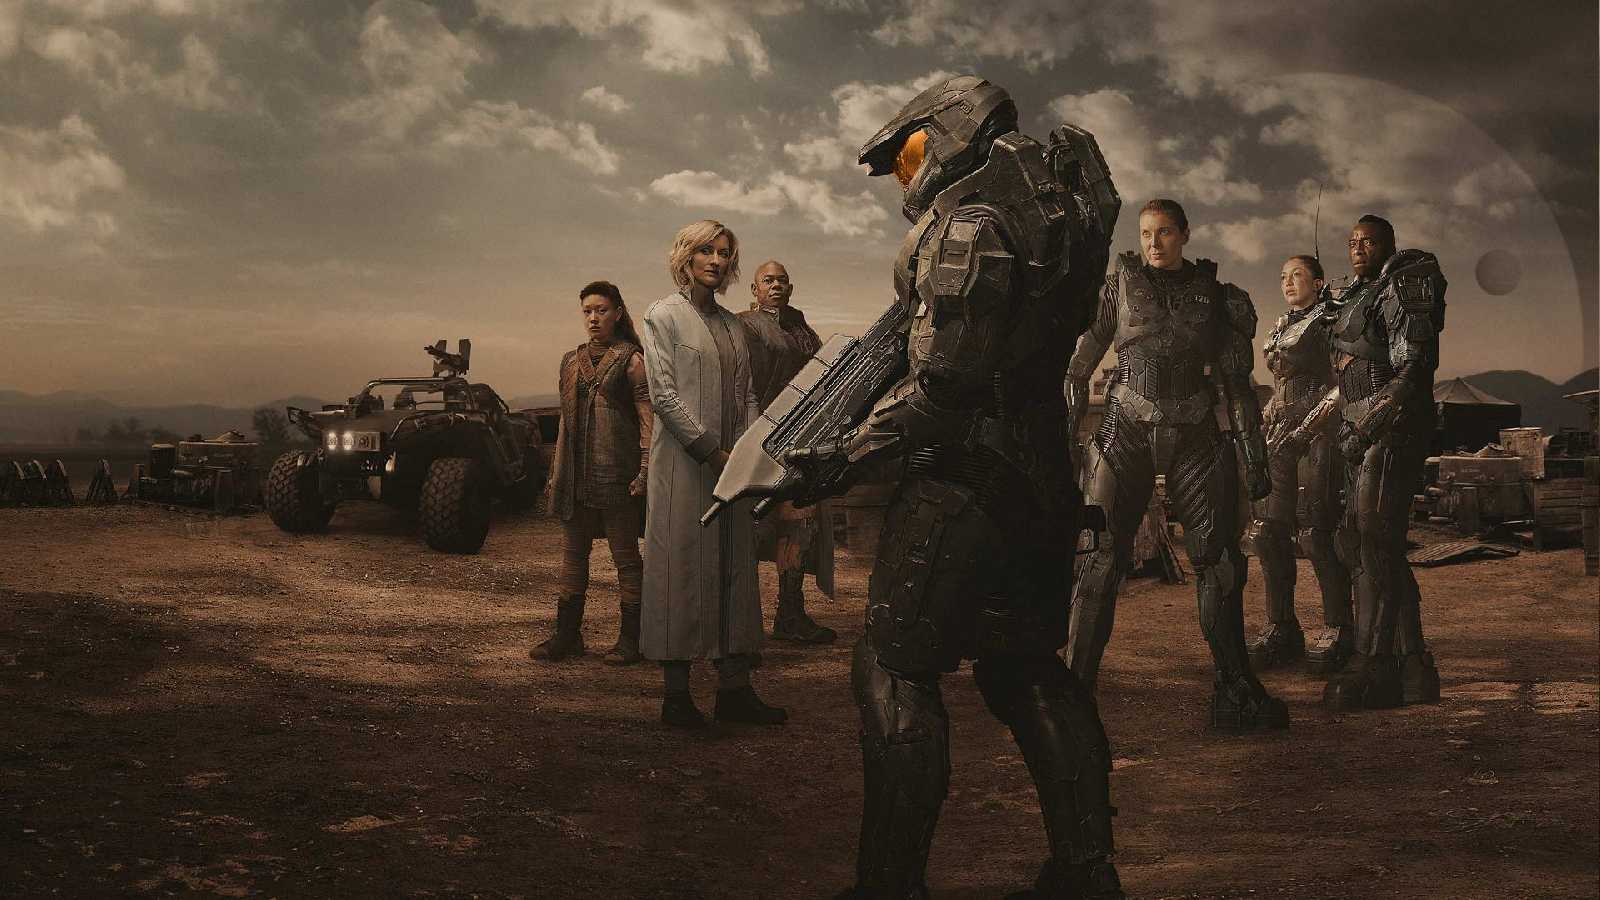 Halo Tv Series How To Watch Release Date Cast And More